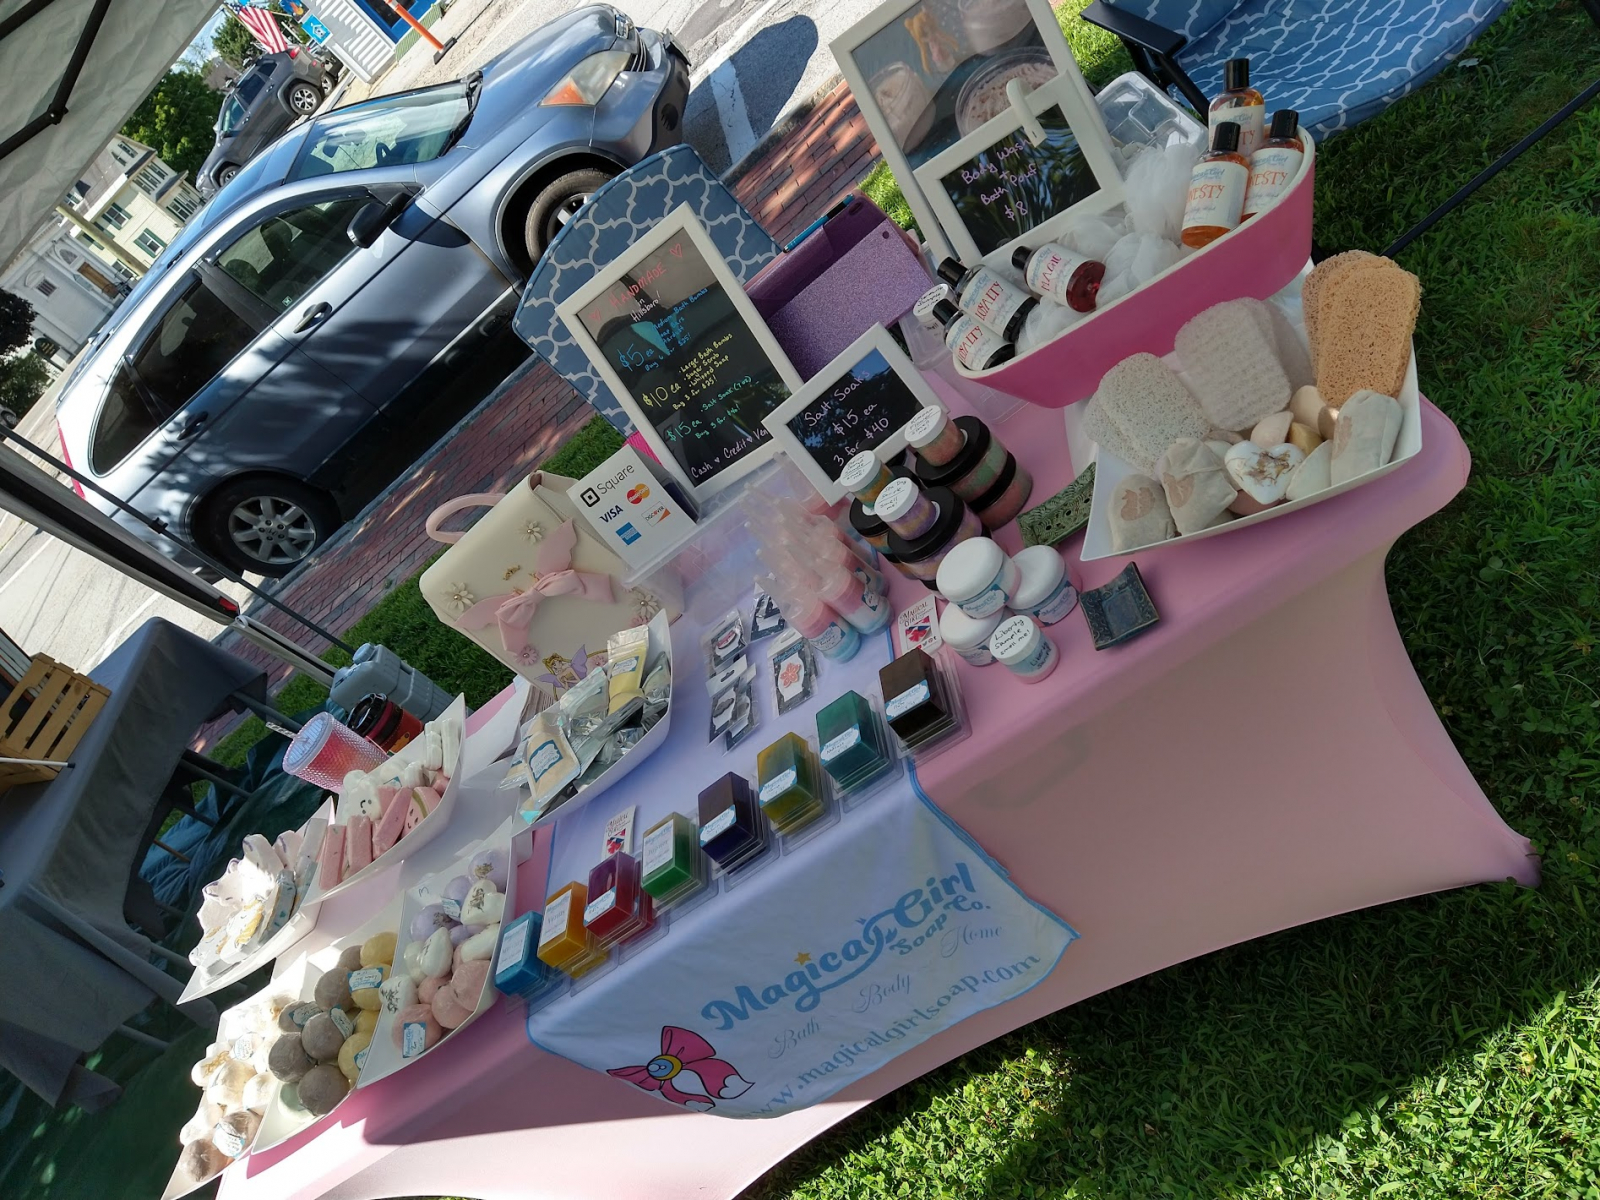 A photo of our setup at the summer market. There are a variety of soaps, scrubs, and bath bombs on a table covered by a pink tablecloth. 